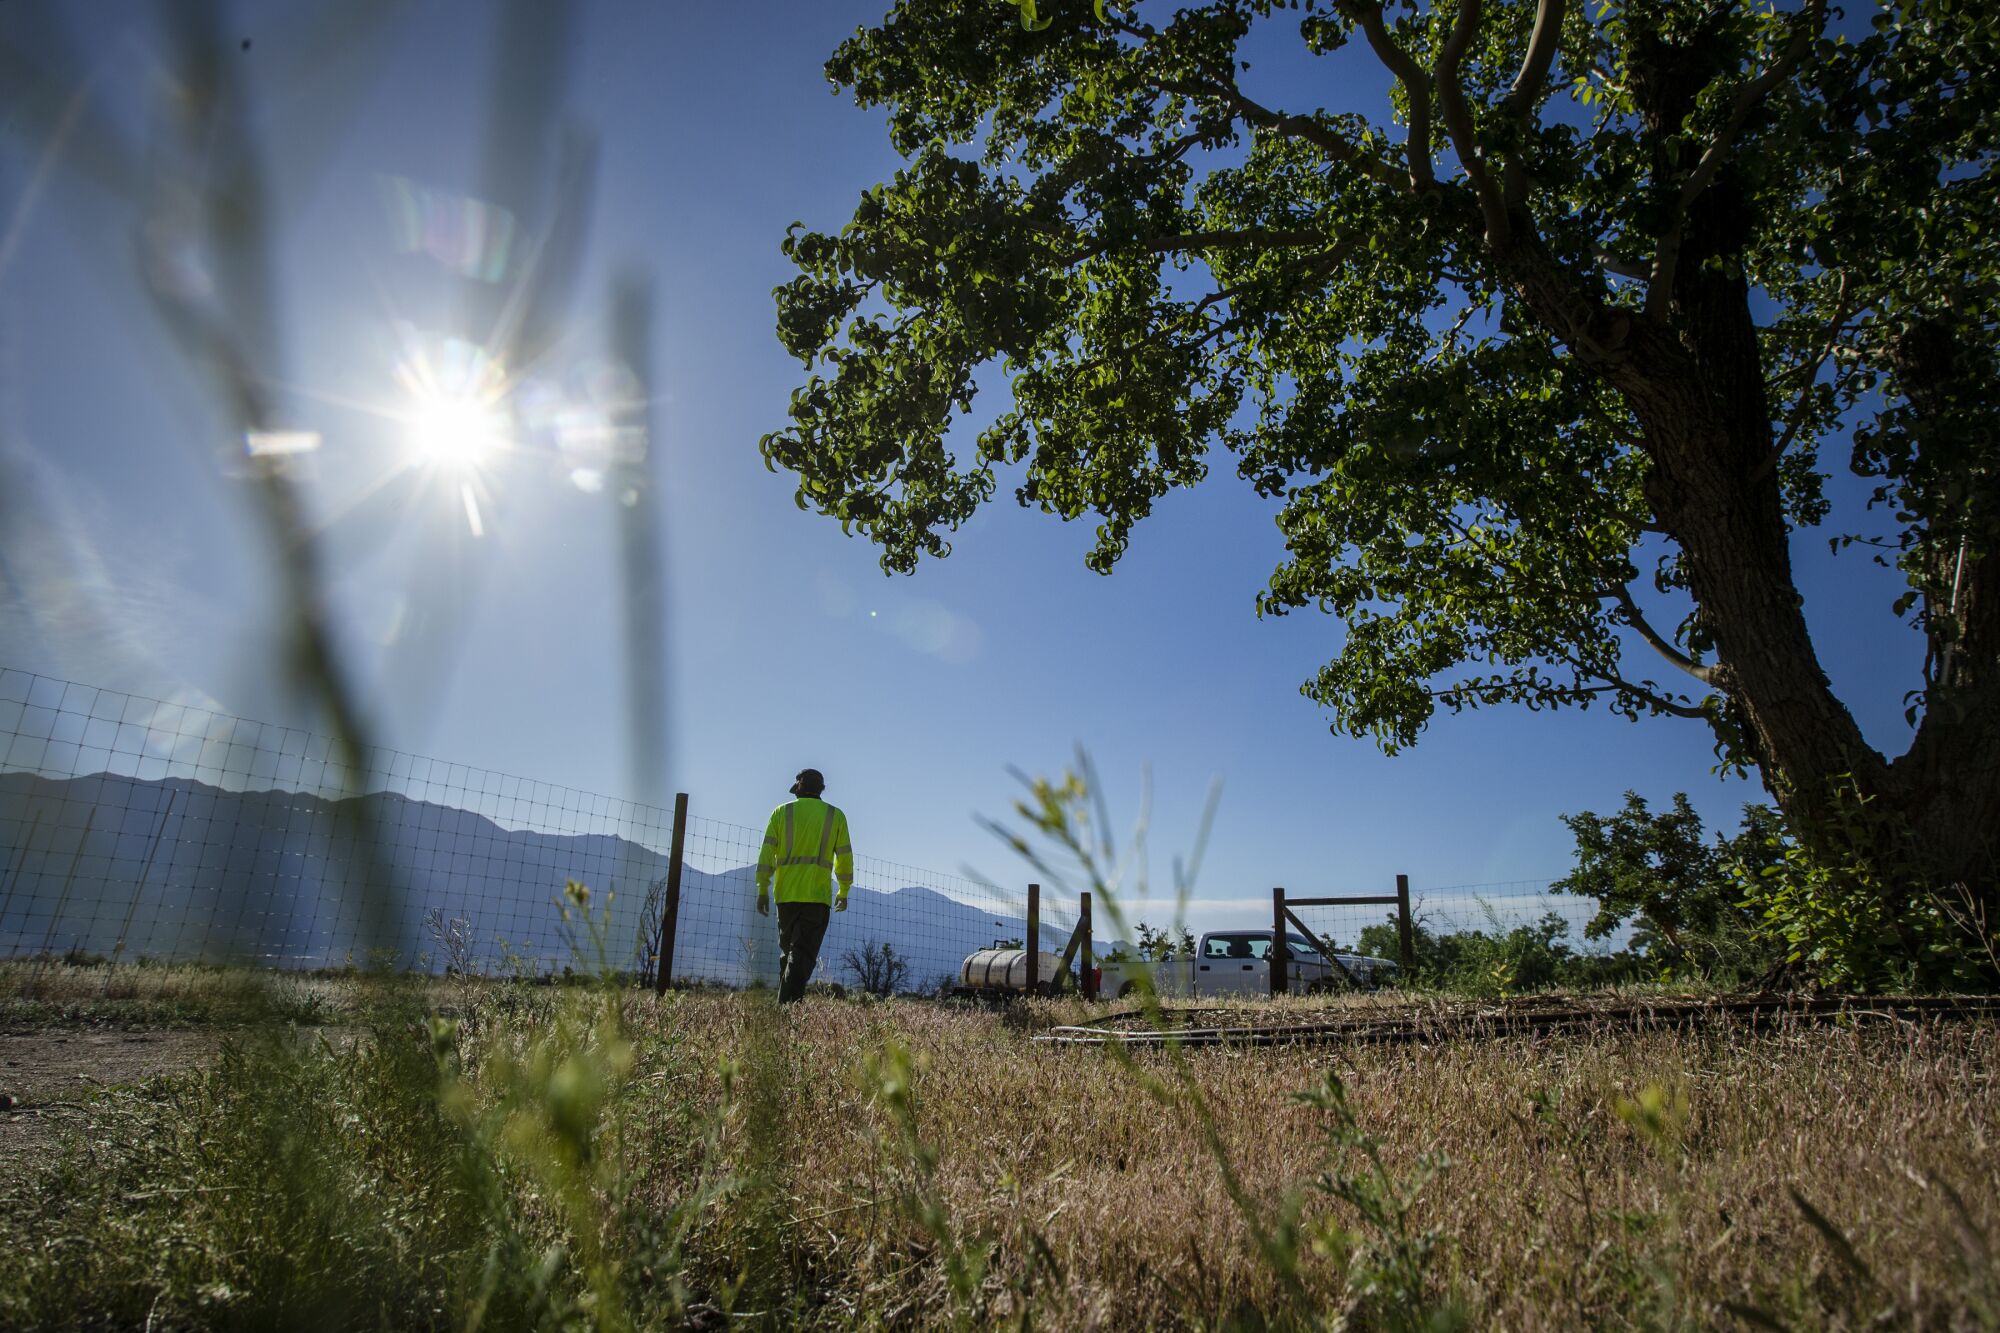 A man walks past a tree toward a work truck on the other side of a wire fence under bright sun with mountains in the distance